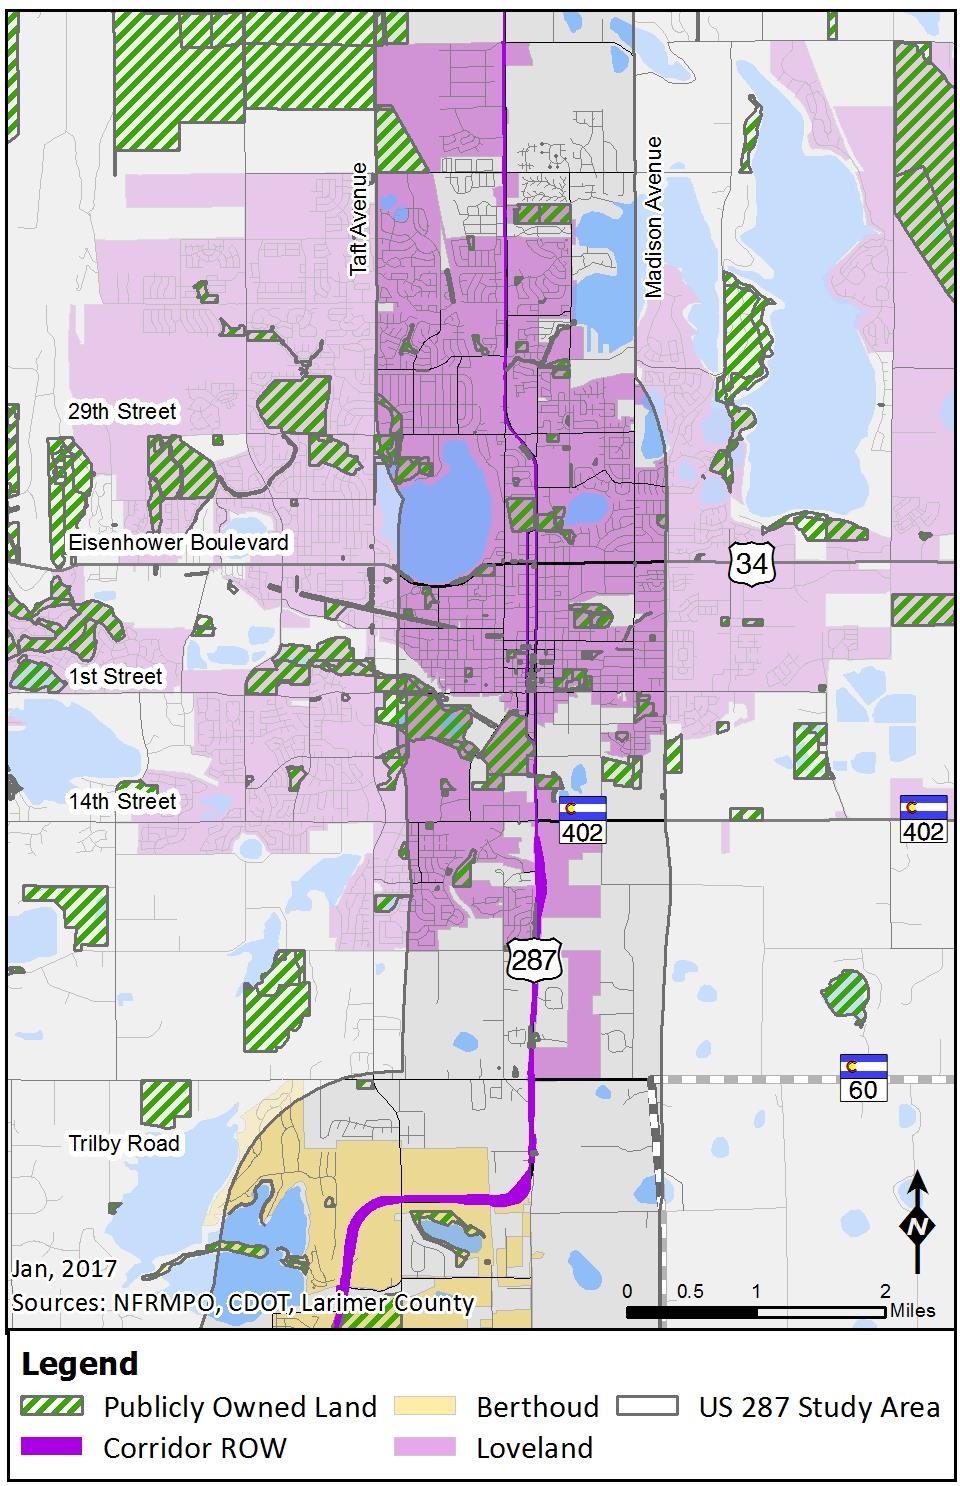 Right-of-Way An estimate of US287 right-of-way is shown on Figure 6-9. Based on Larimer County parcel data, the right-of-way is colored in between the parceled land.